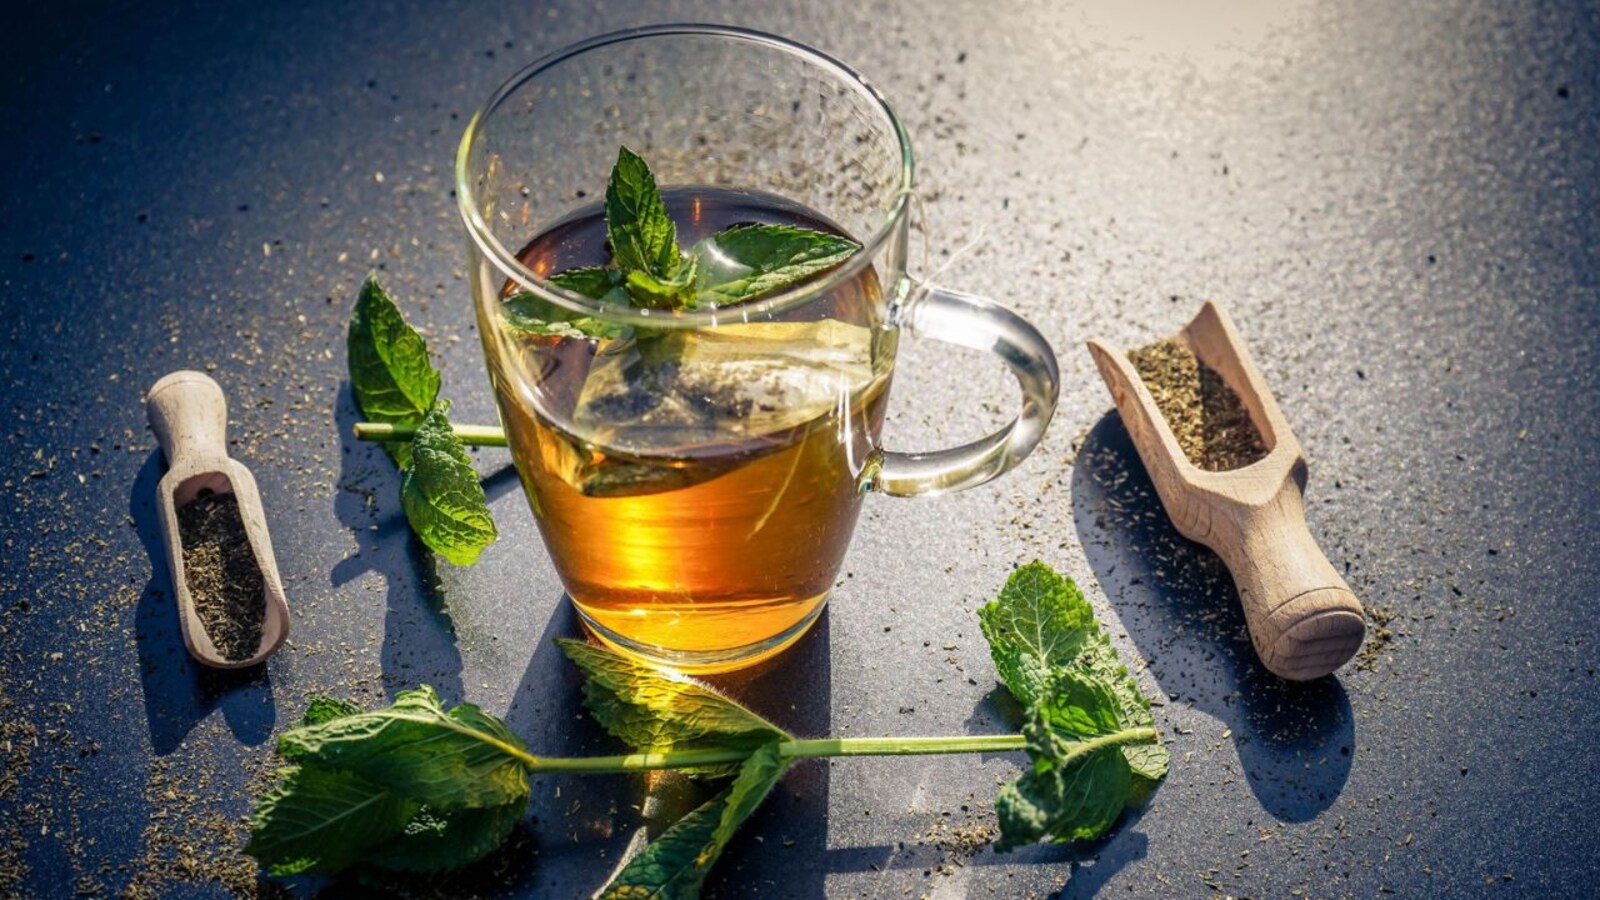 https://images.moneycontrol.com/static-mcnews/2023/04/green-tea-for-morning.jpg?impolicy=website&width=1600&height=900